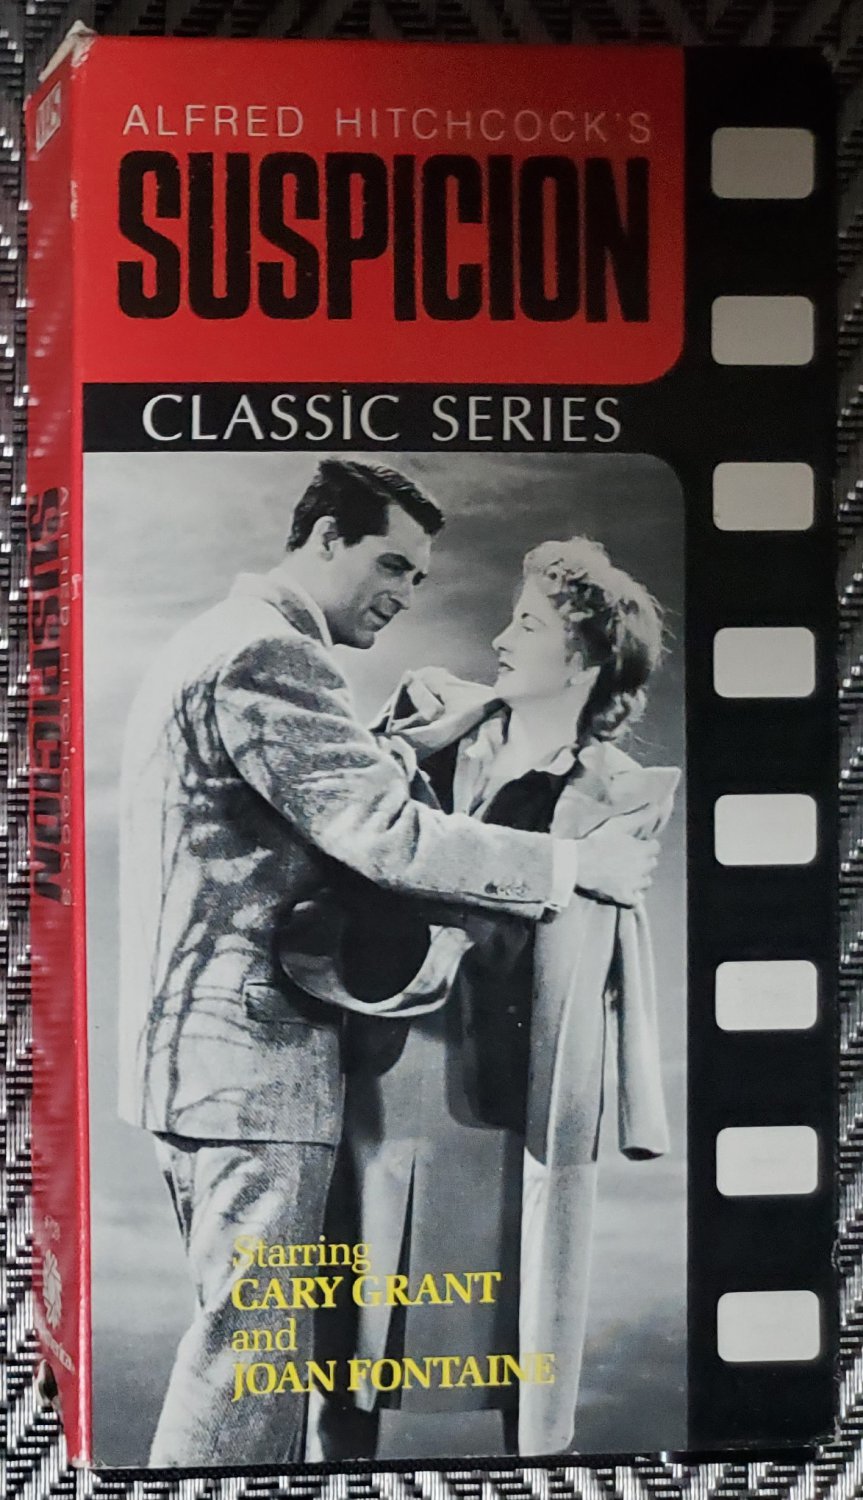 Video Tape VHS Alfred Hitchcockâ��s Suspicion Black & White Cary Grant Joan Fontaine